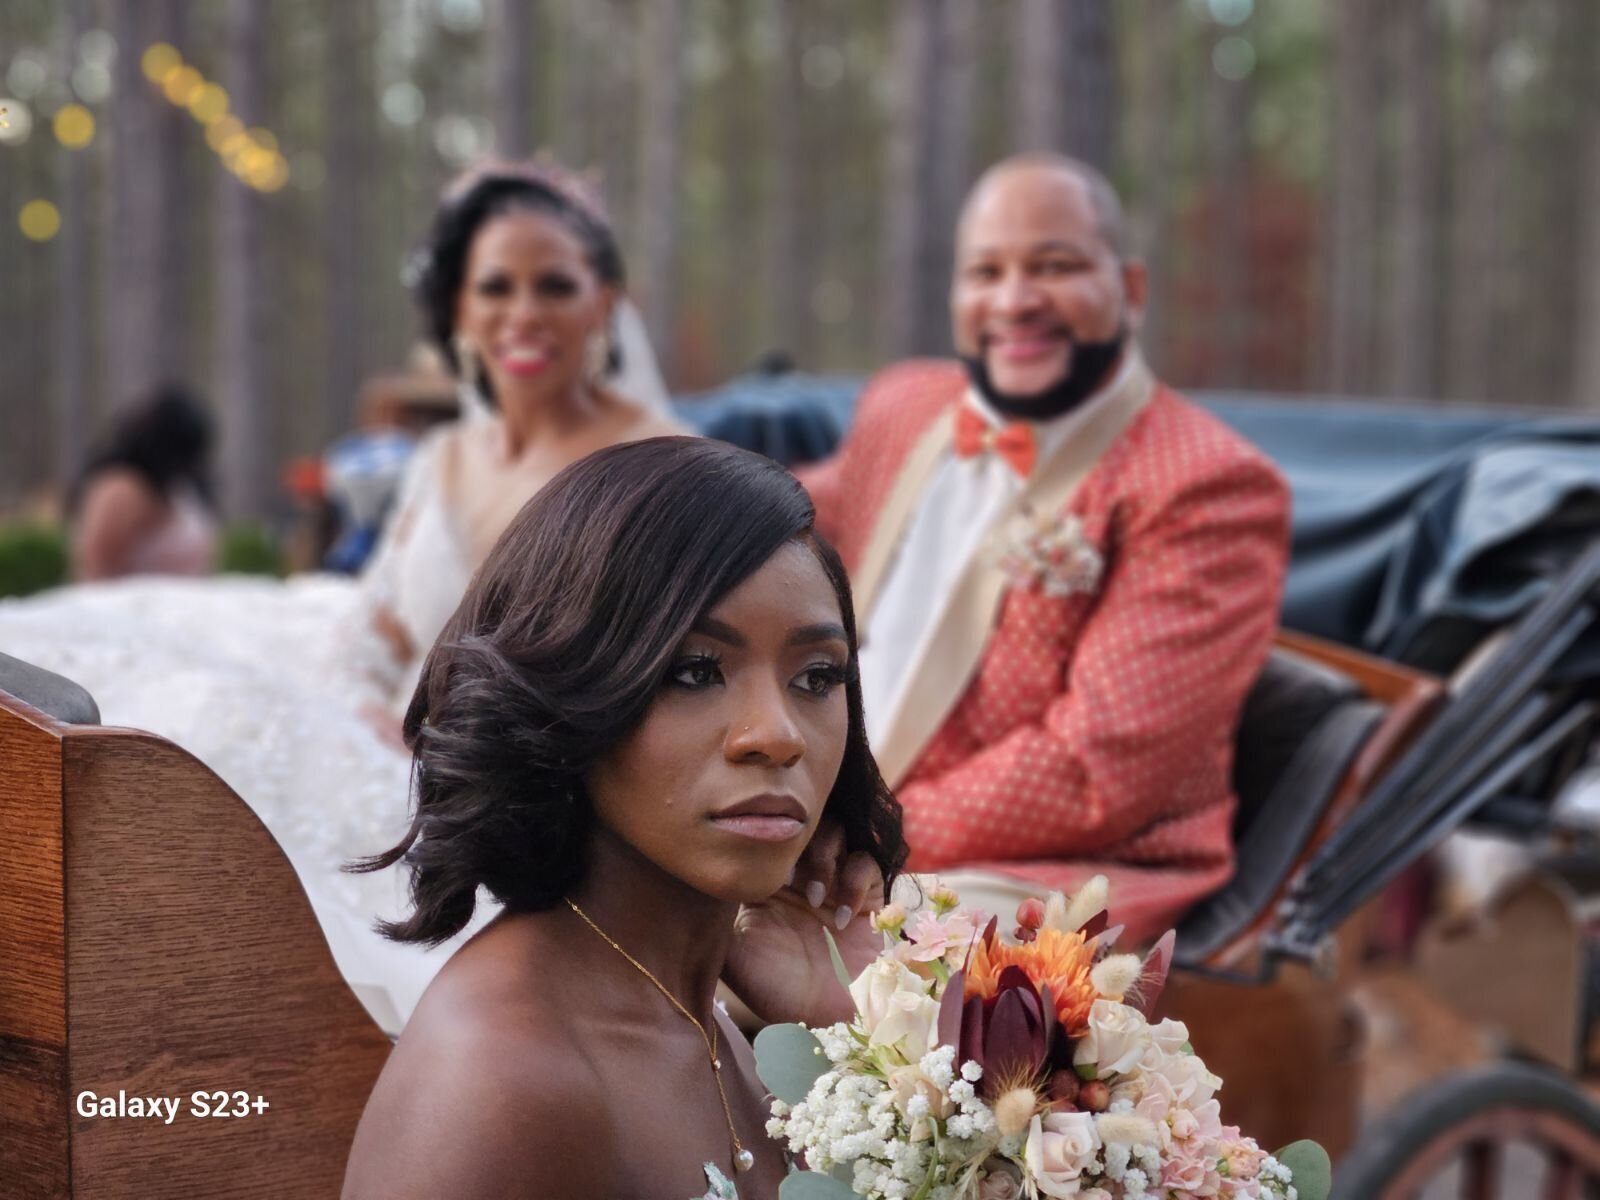 Elevate your special day with Shuman Koutory Event & Design, the top wedding planner in Georgia. From Atlanta to beyond, we create extraordinary experiences for couples seeking perfection.